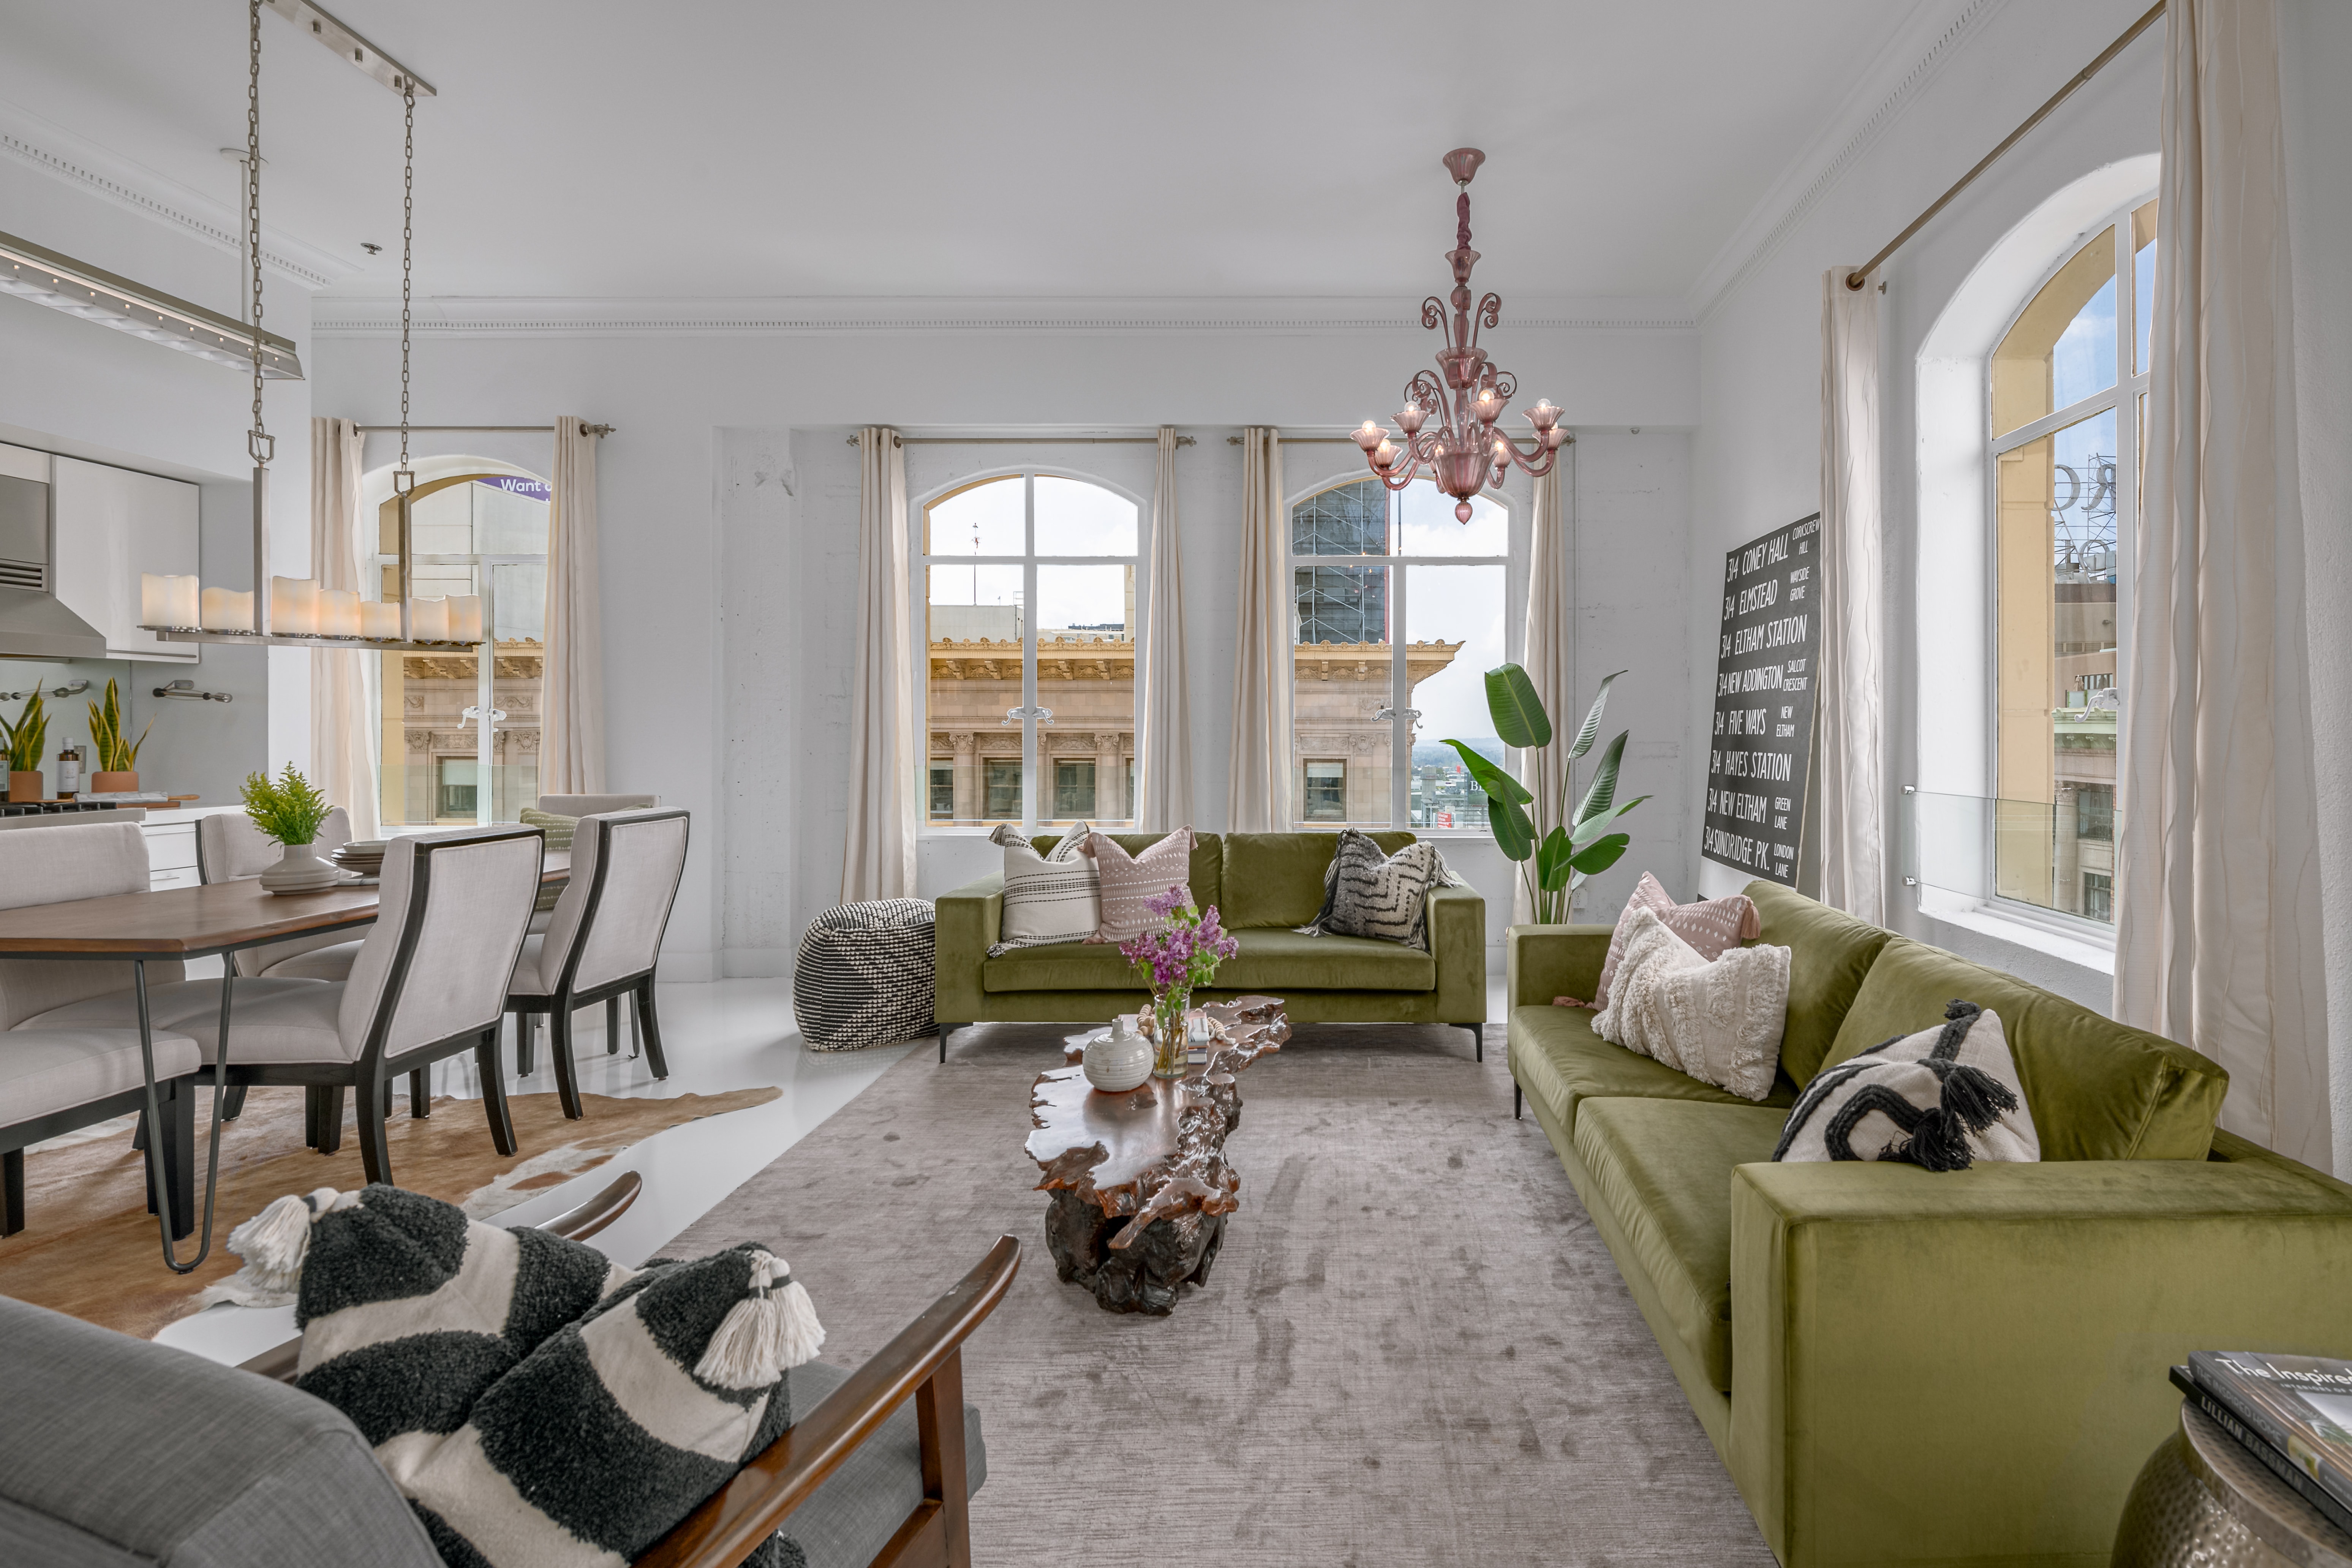 Stunning living area with arched windows looking out to breathtaking city views.